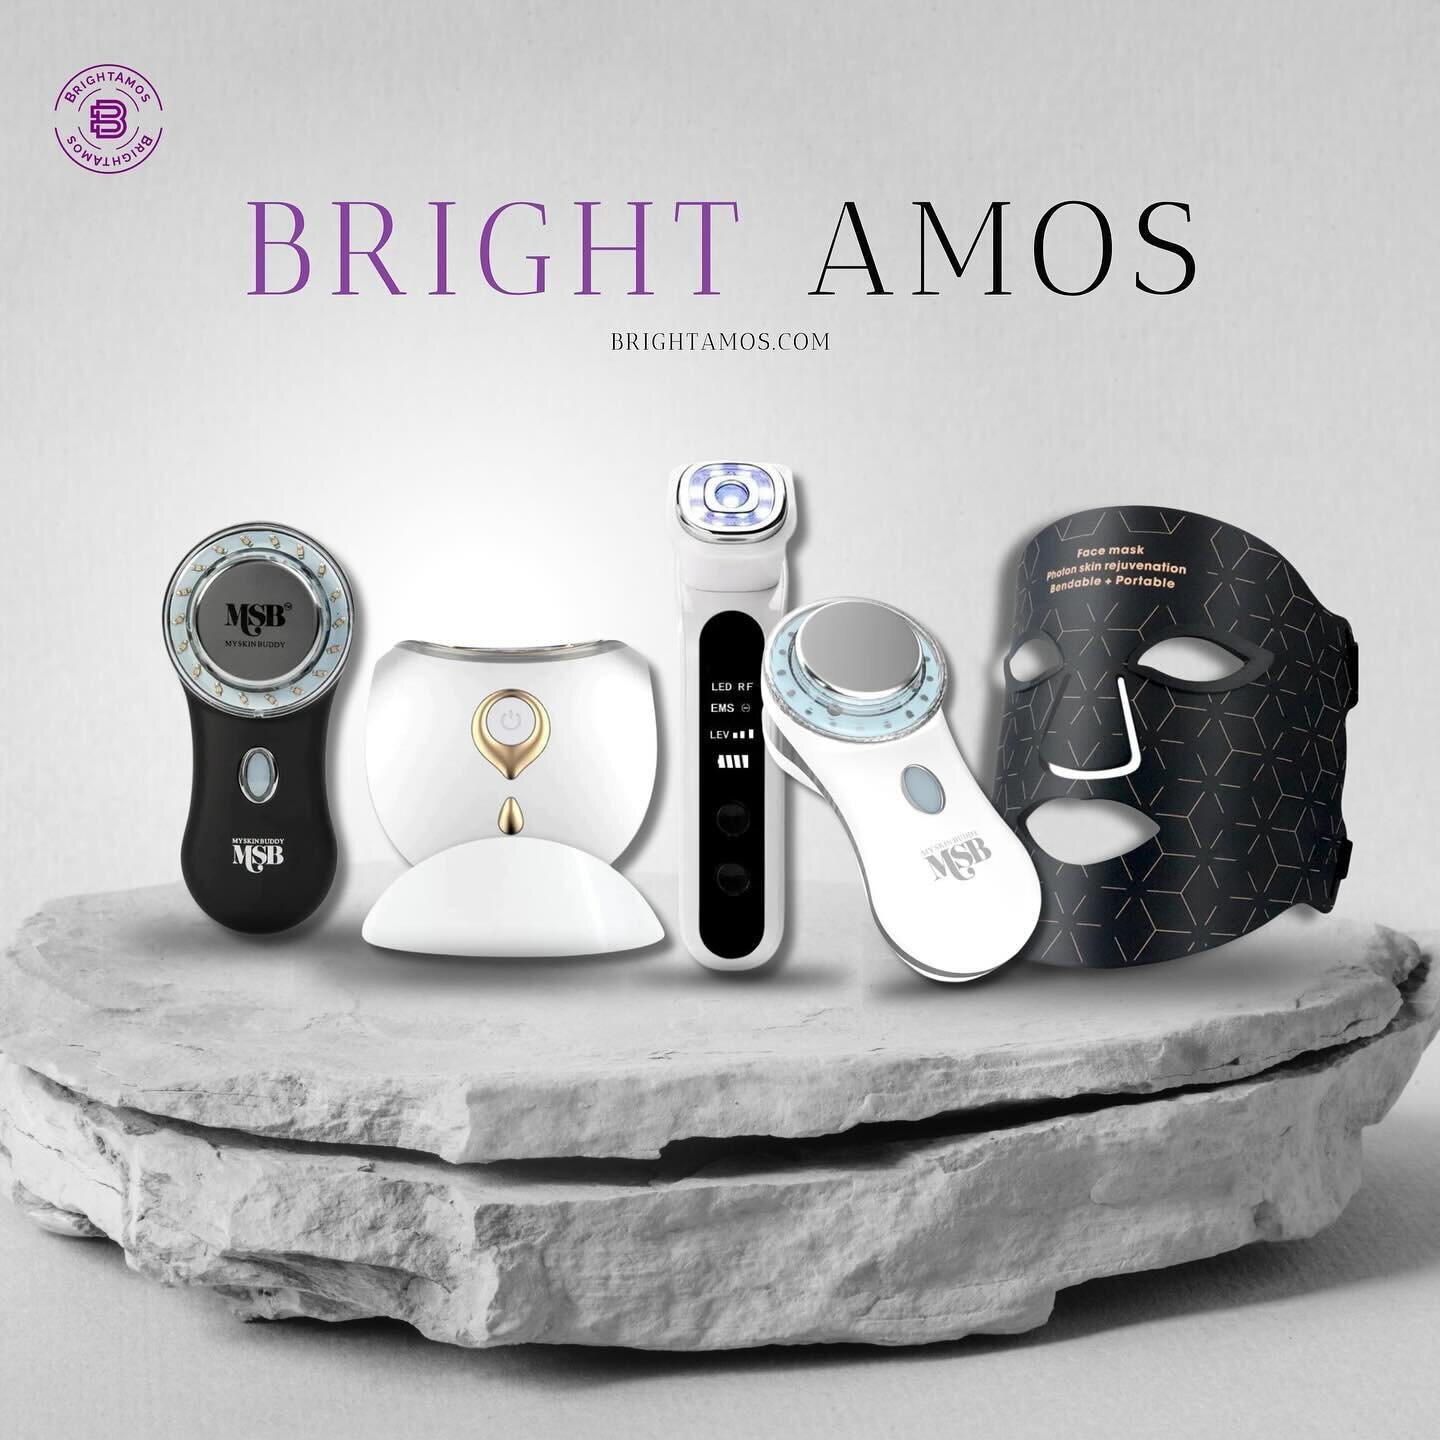 Skin concerns got you down?

Dermatologist-approved solutions are here!  BrightAmos offers products targeted at repairing damage &amp; scarring and evening out skin tone for a healthy, radiant glow. ✨

Explore our range and find your perfect match!  